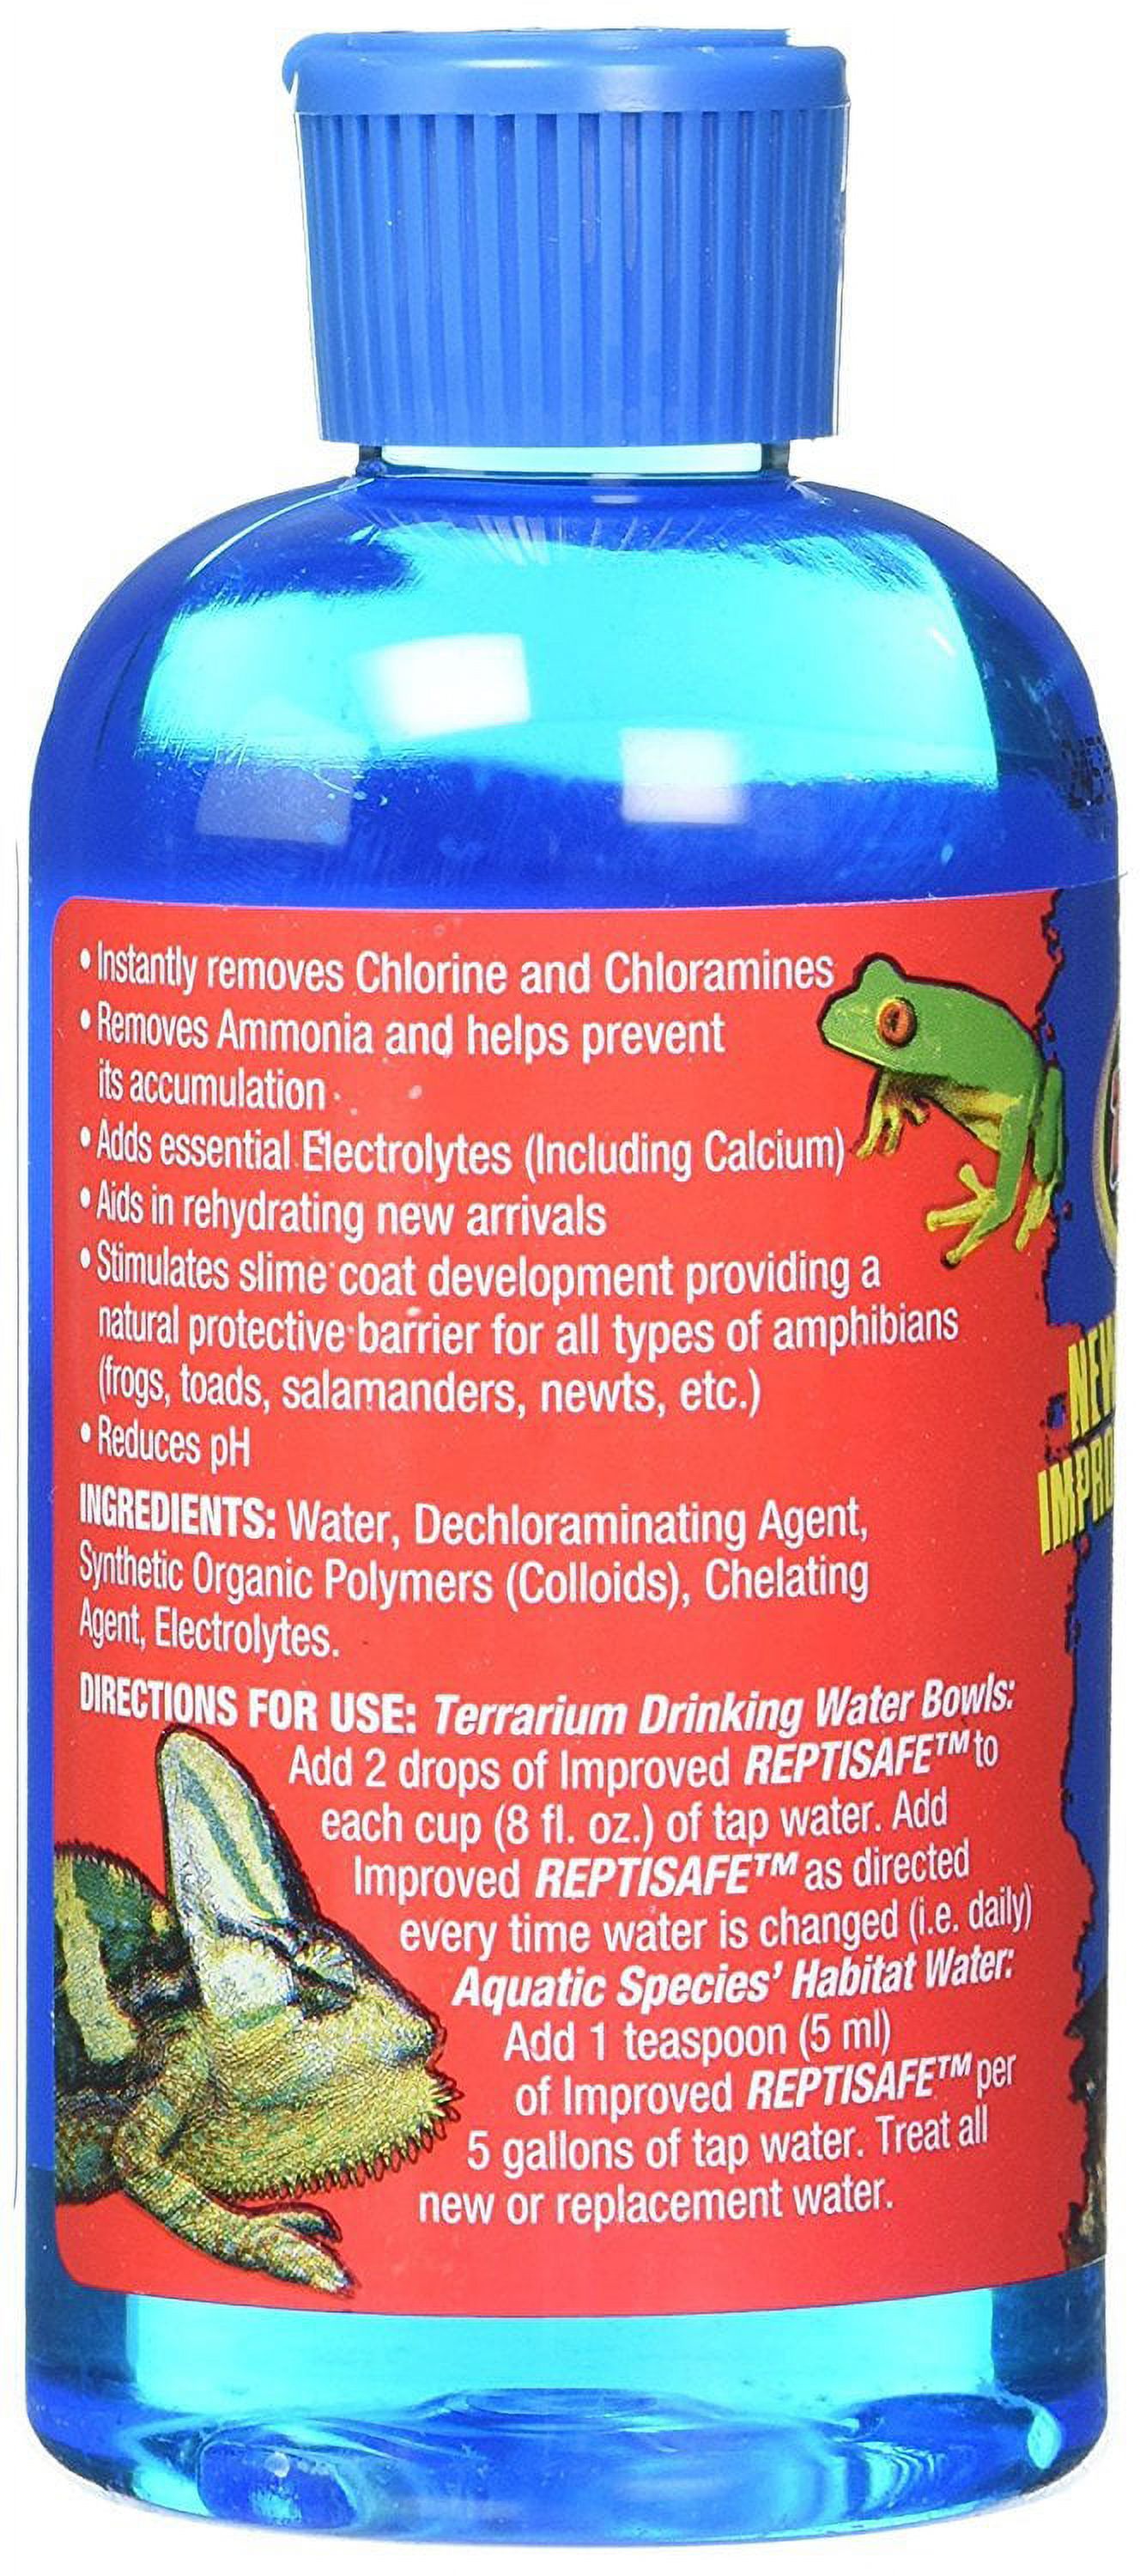 Zoo Med ReptiSafe Instant Terrarium Water Conditioner, 8.75-Ounce - image 2 of 4